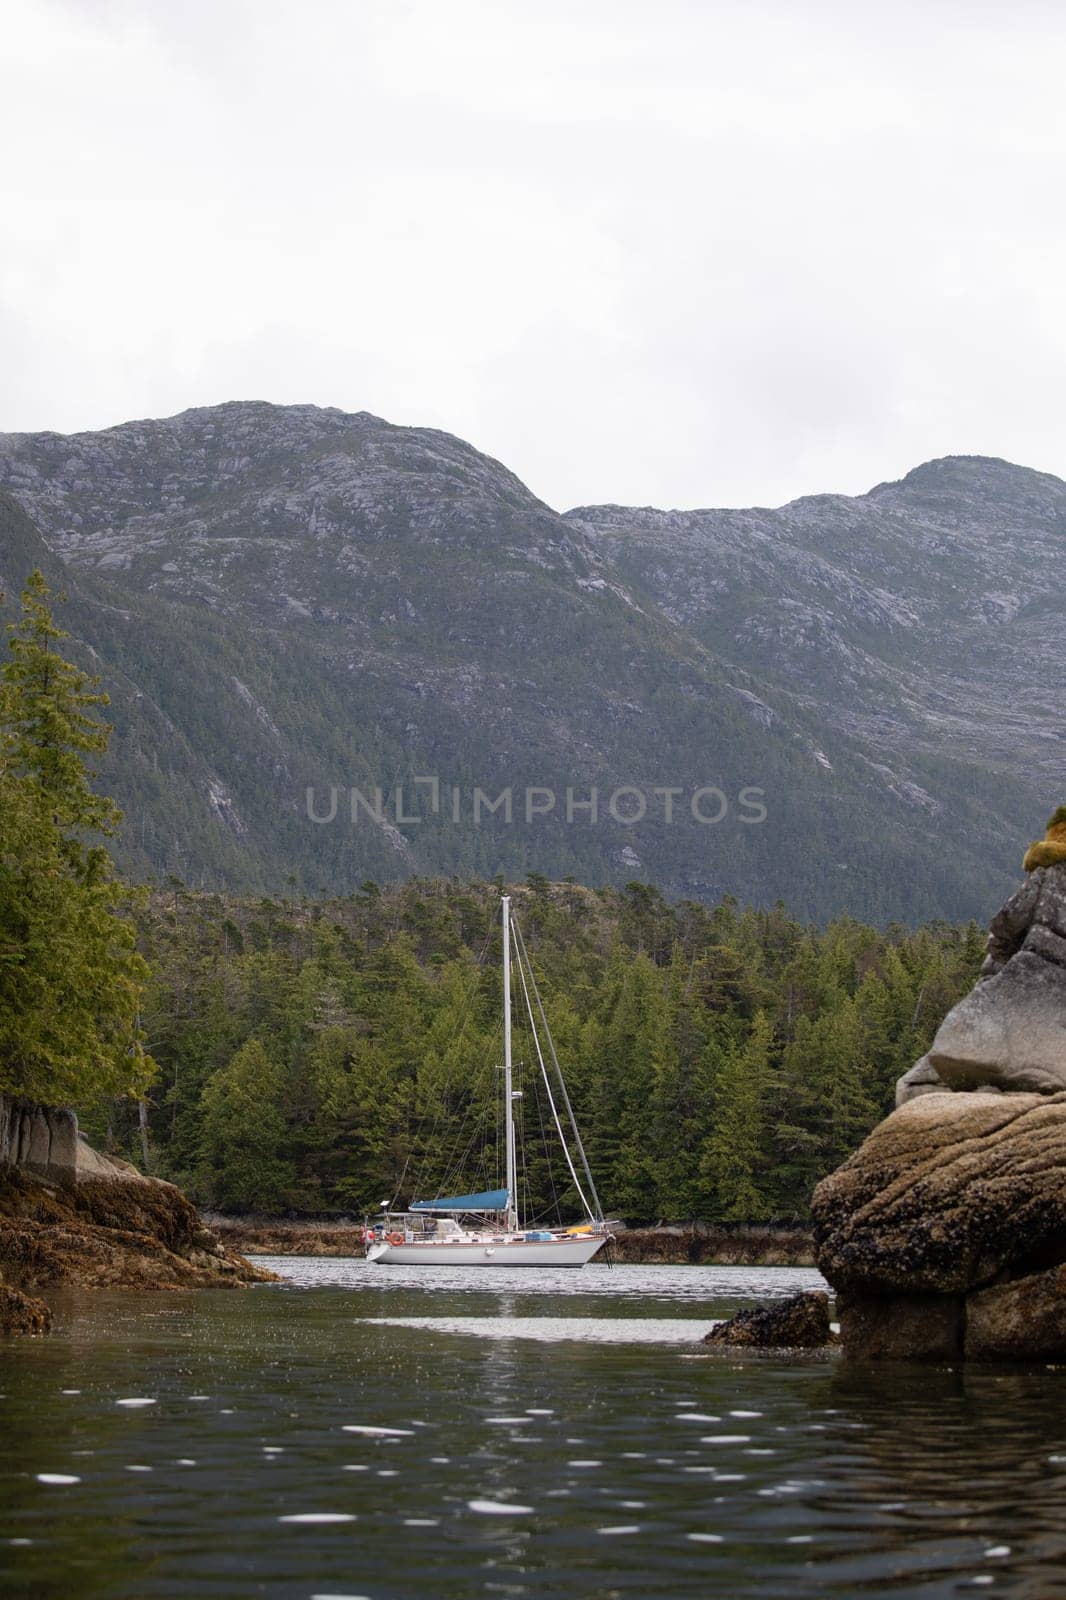 A beautiful sailboat in a remote anchorage with mountains in the background, Central coast of British Columbia, Canada